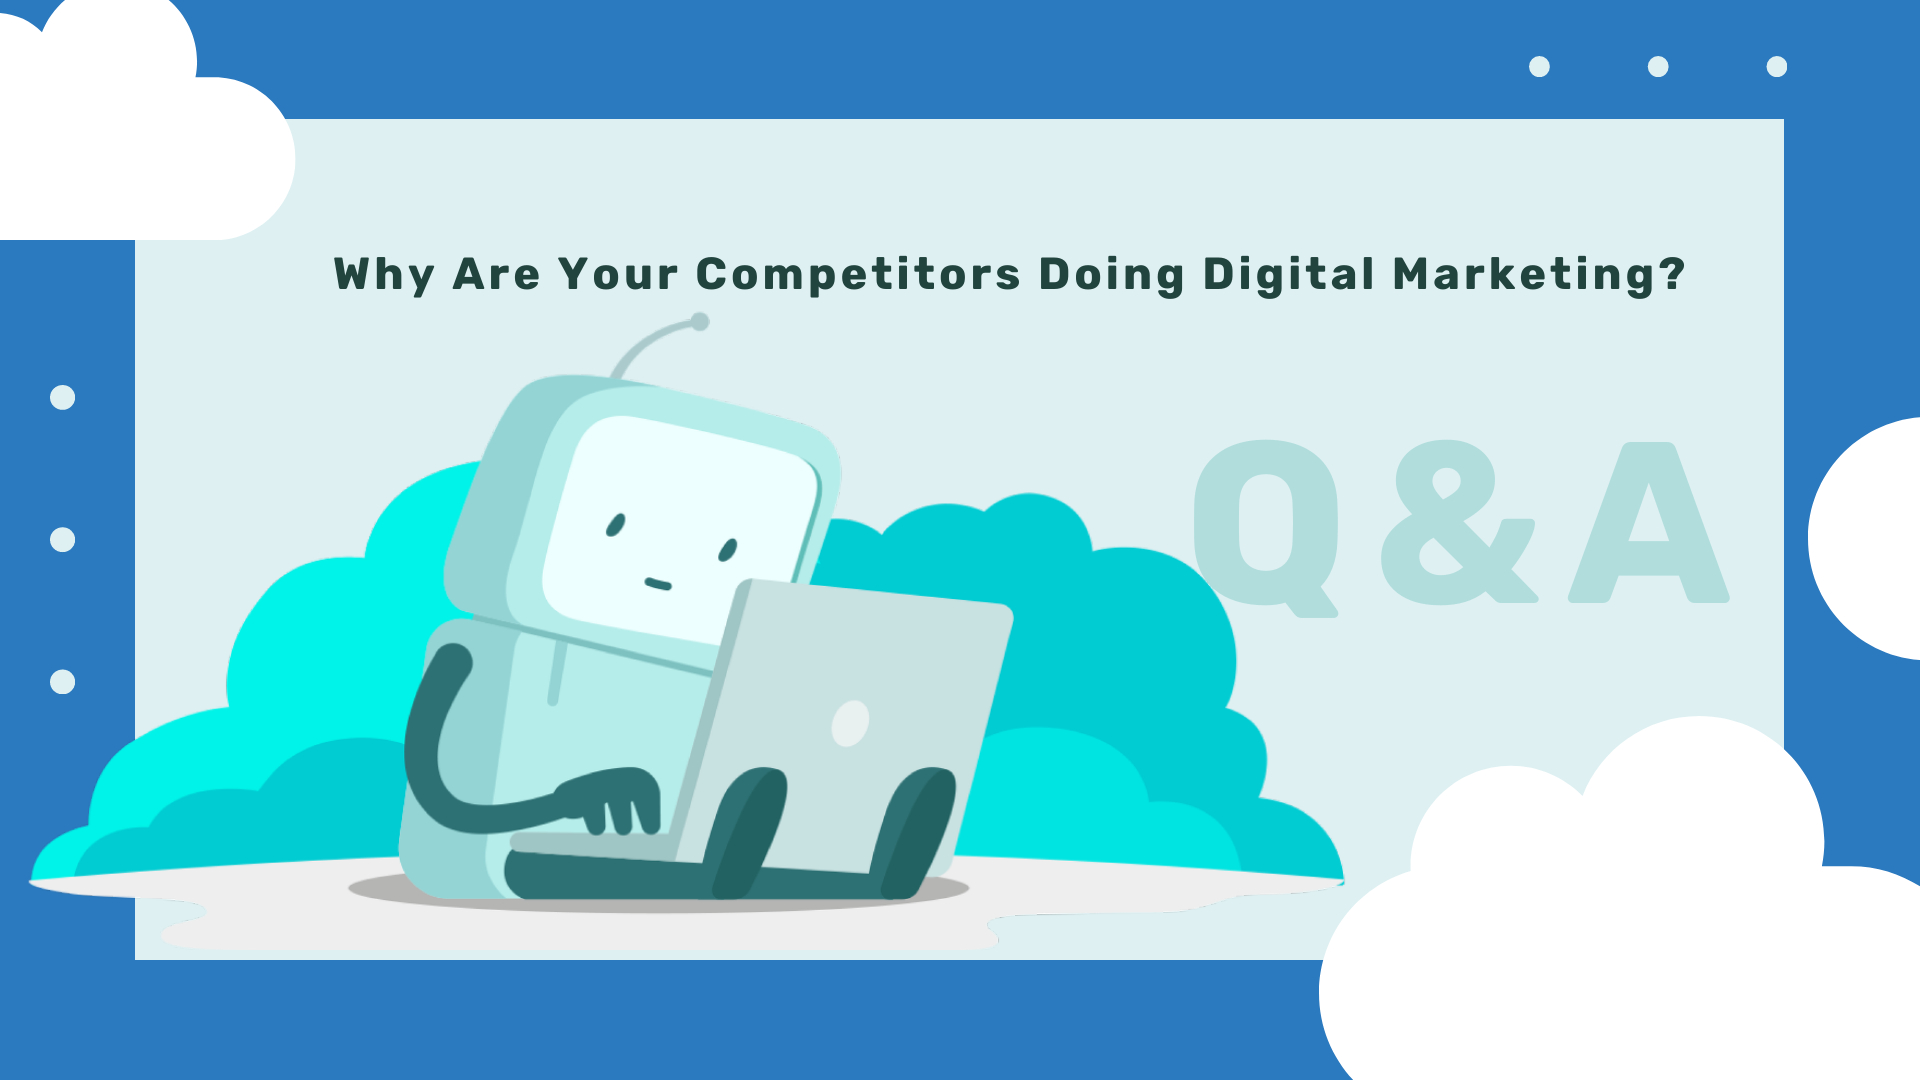 Why Are Your Competitors Doing Digital Marketing?